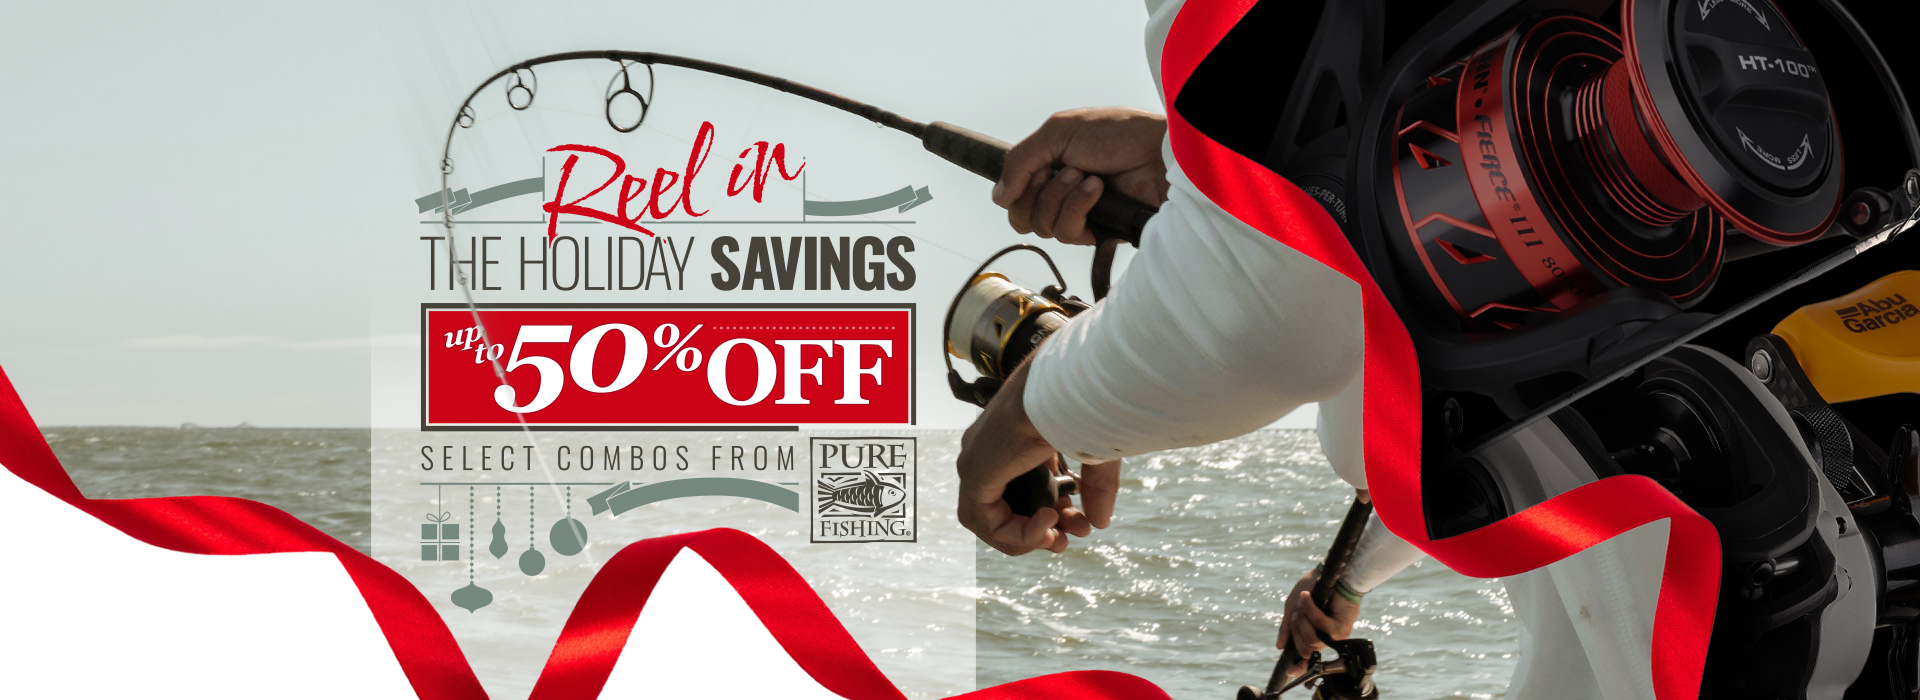 Reel in the Holiday Savings with Pure Fishing: Up to %55 Off Select Combos!